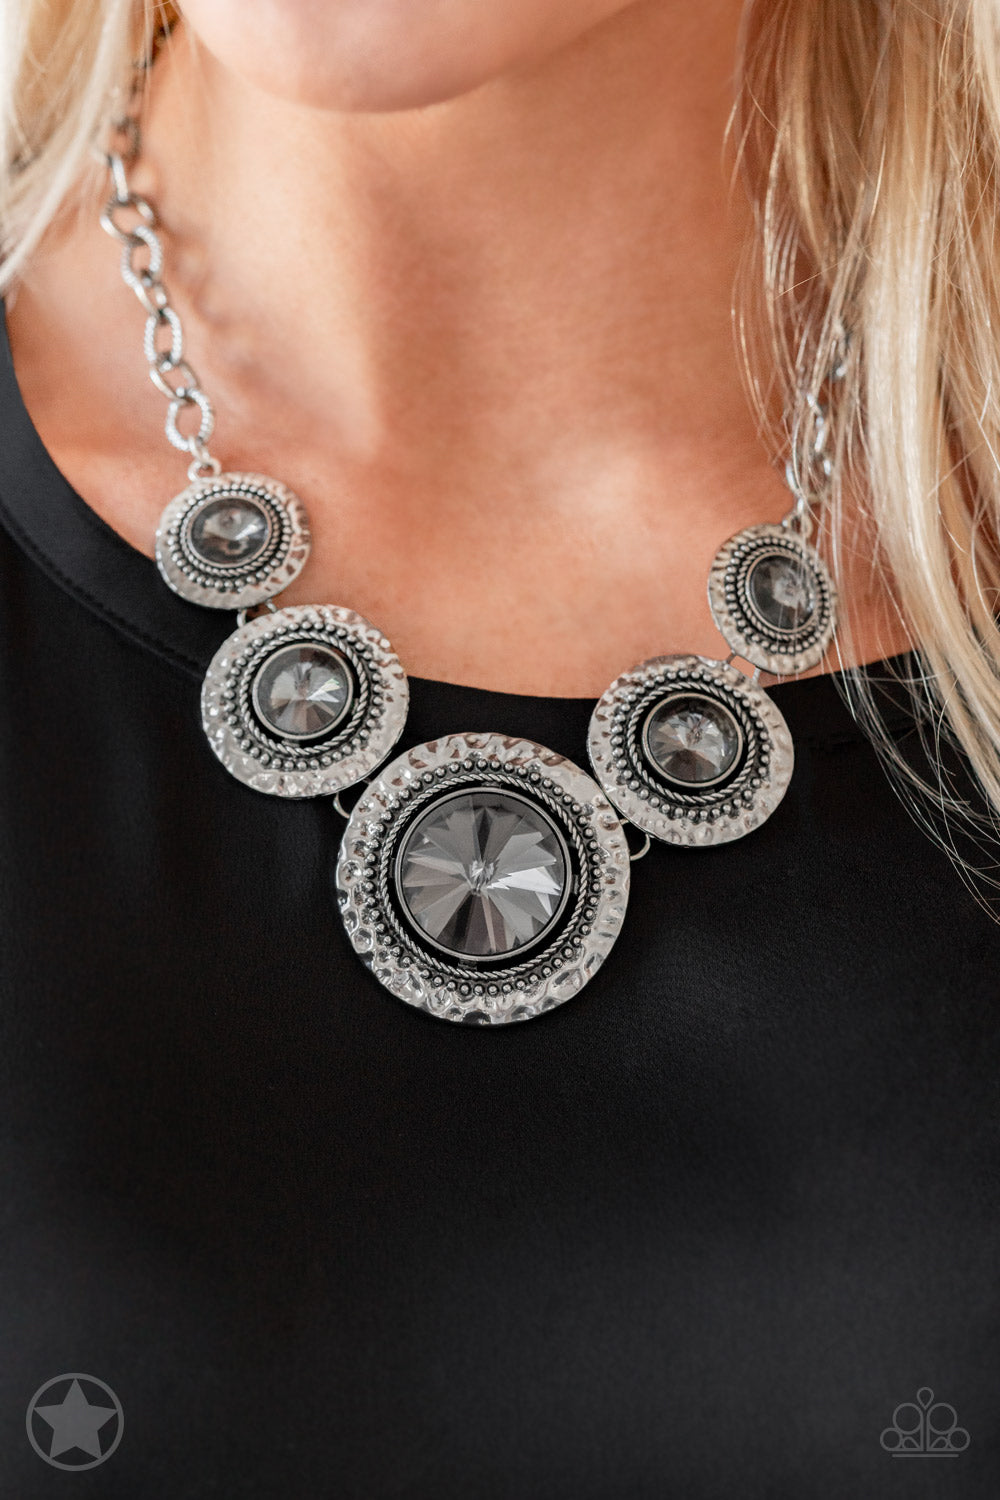 Global Glamour Silver Blockbuster Necklace - Paparazzi Accessories Gradually increasing in size, dramatically oversized smoky gems are pressed into the centers of hammered and silver studded frames. The blinding frames link below the collar for a glamorous, statement-making finish. Features an adjustable clasp closure.   Sold as one individual necklace. Includes one pair of matching earrings.